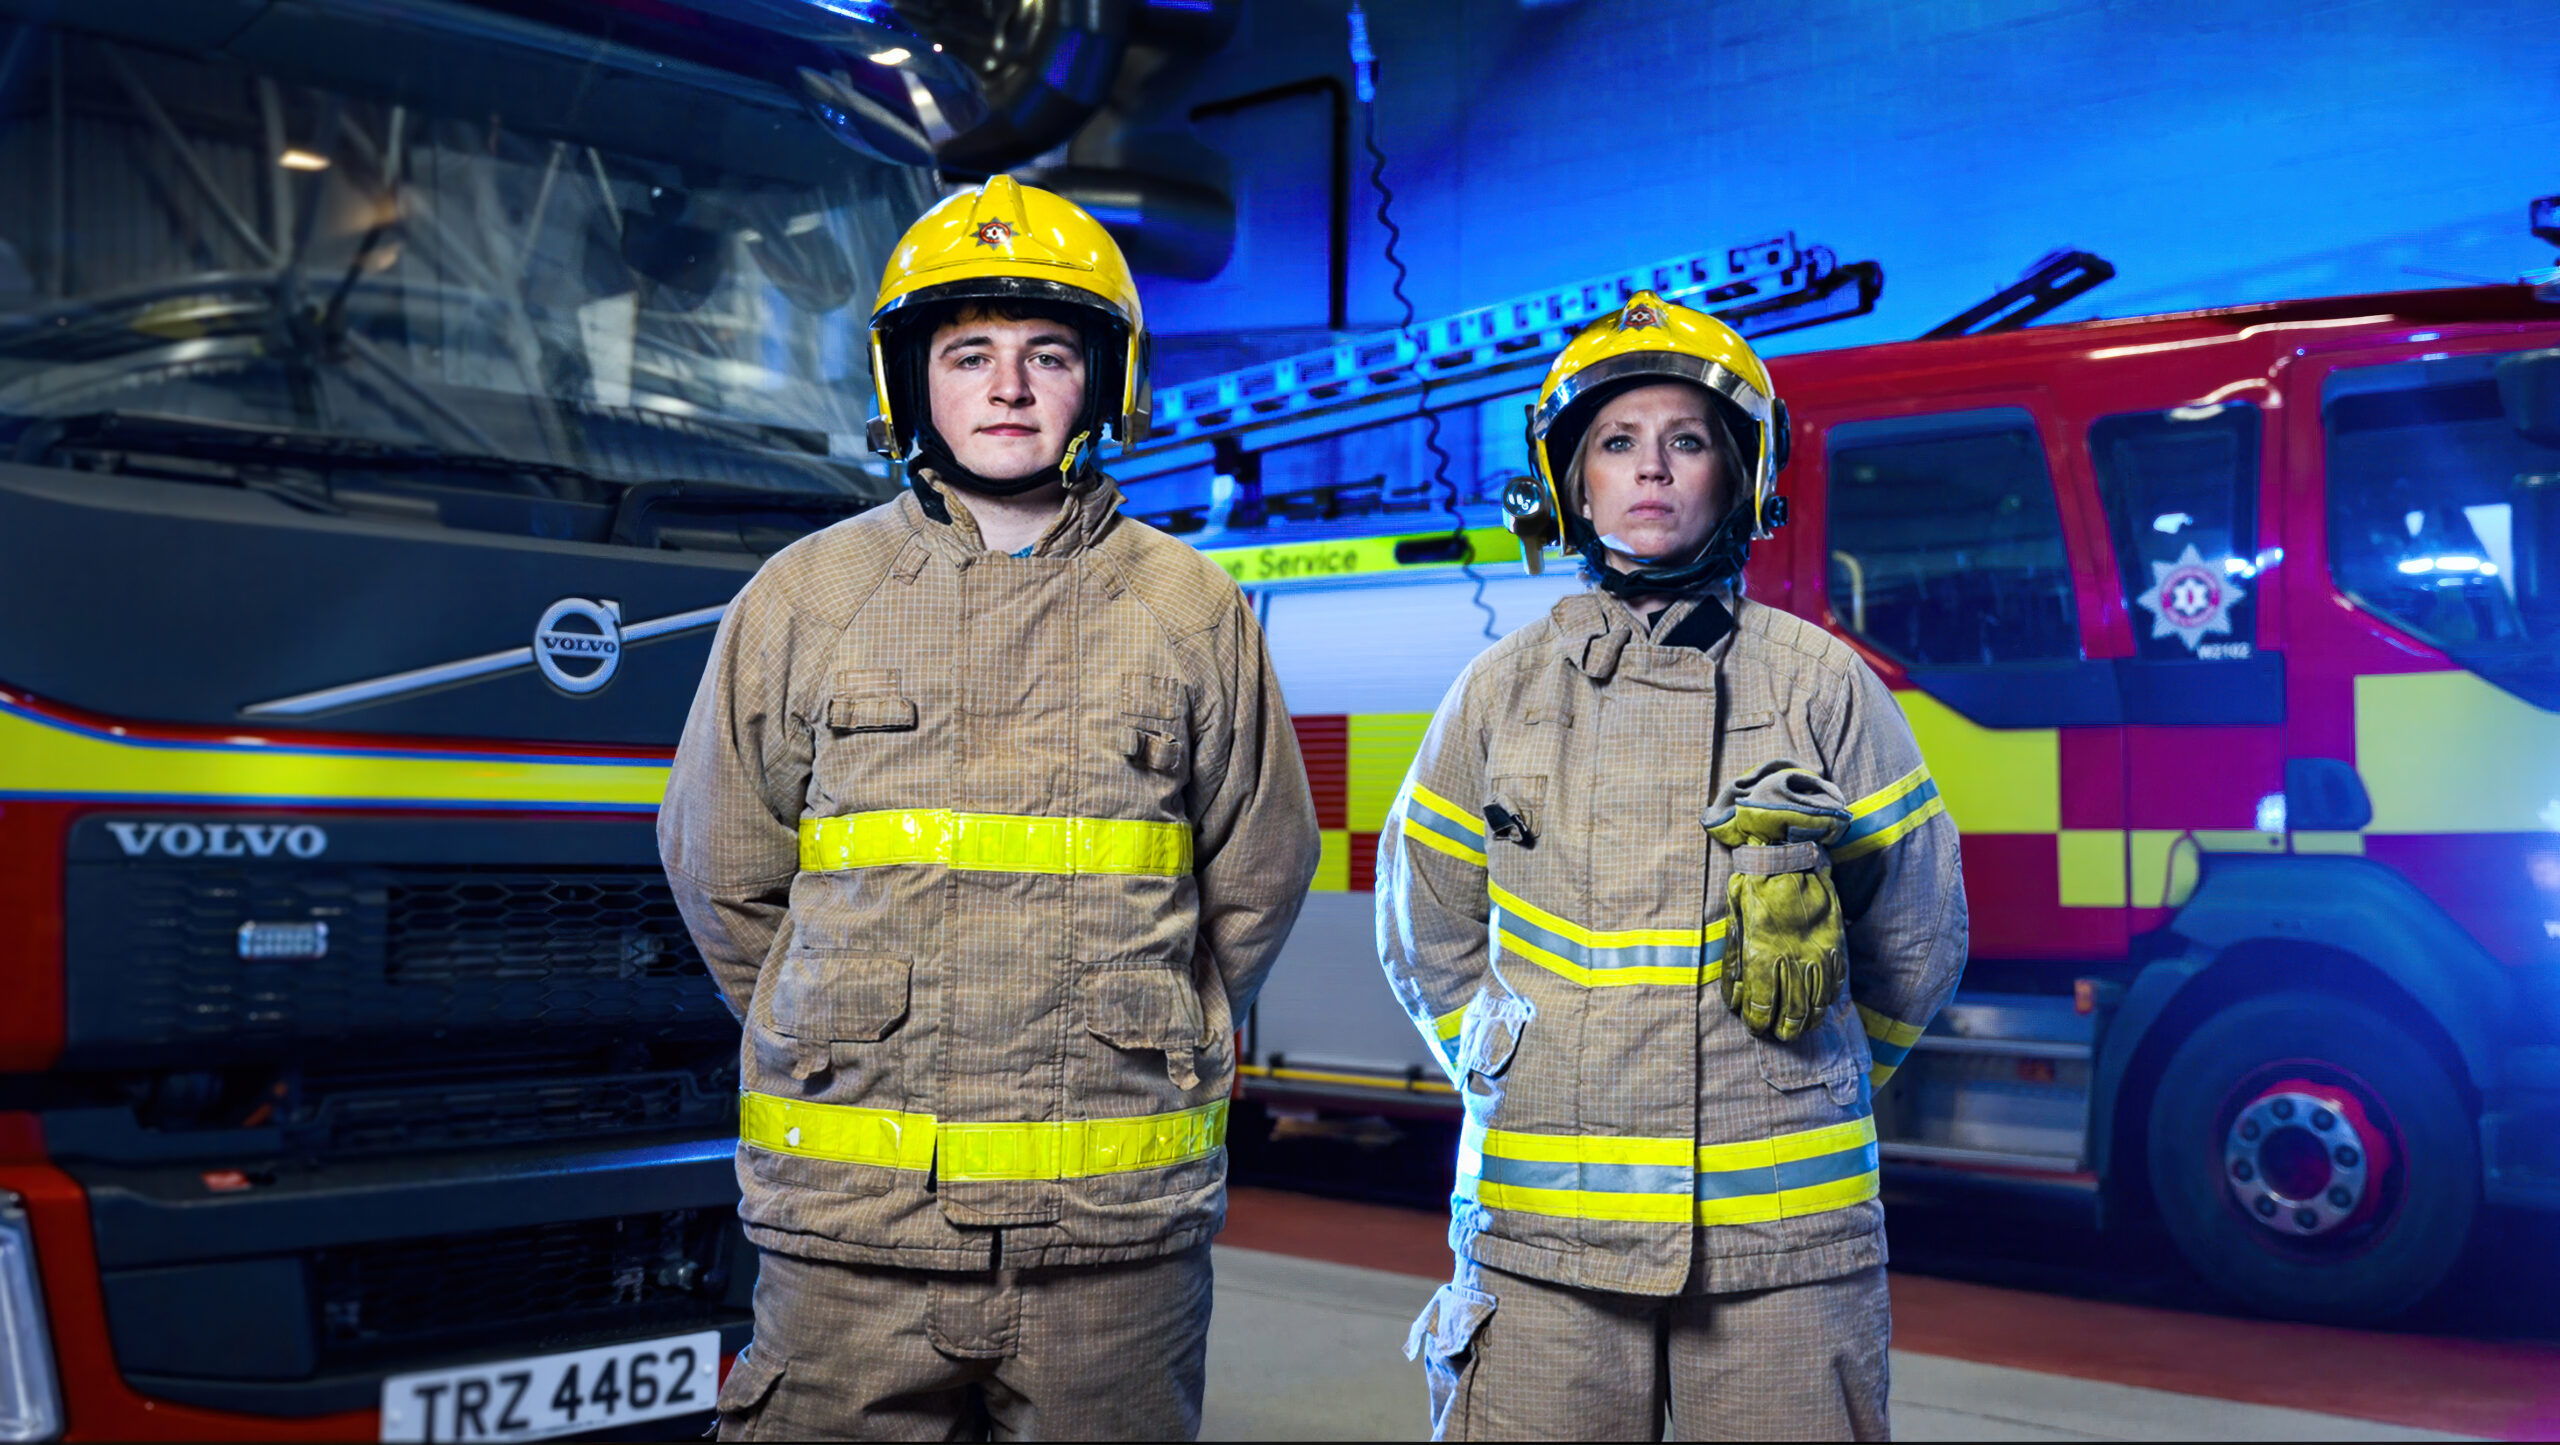 One male Firefighter and one female Firefighter standing in Firefighting uniform looking straight to camera with two fire appliances in the background.